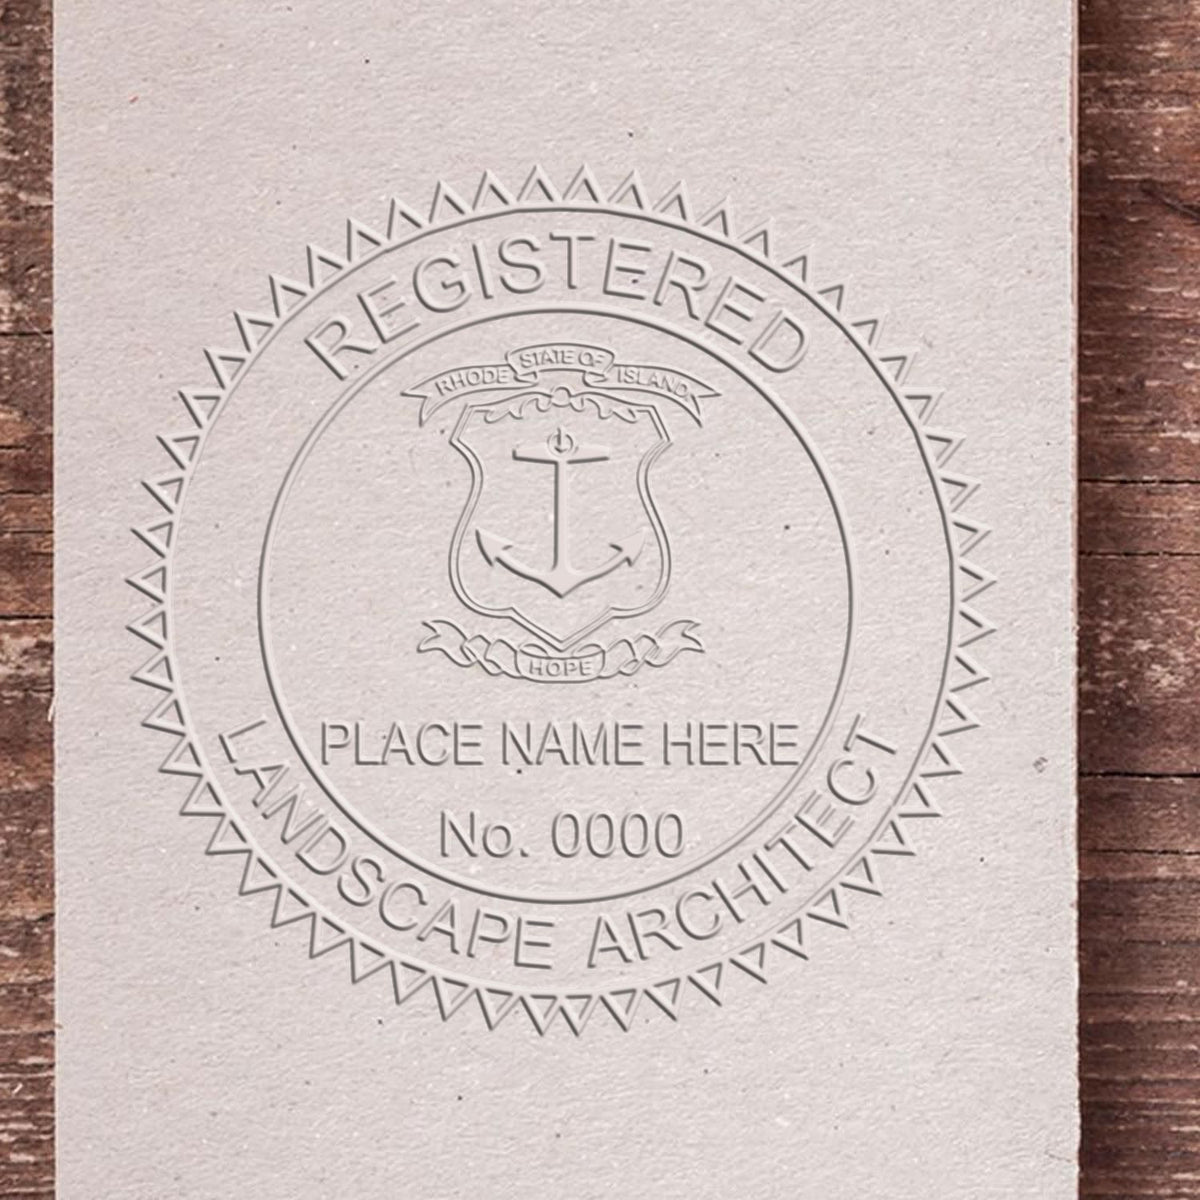 The Gift Rhode Island Landscape Architect Seal stamp impression comes to life with a crisp, detailed image stamped on paper - showcasing true professional quality.